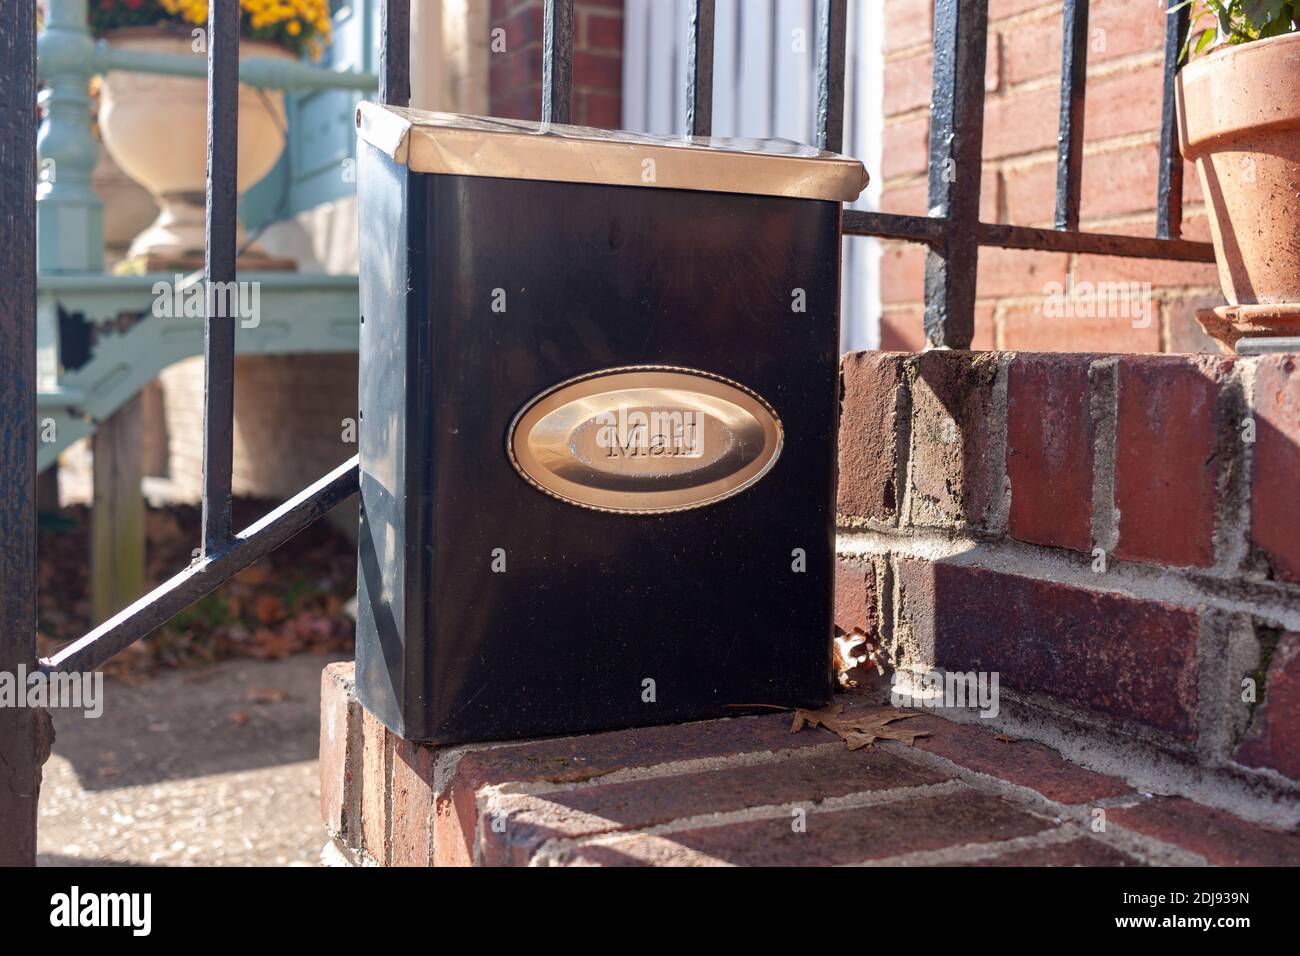 Close up isolated image of a small size vertical mail box that is attached to the railings of the brick outdoor stairs at the entrance of a townhome. Stock Photo